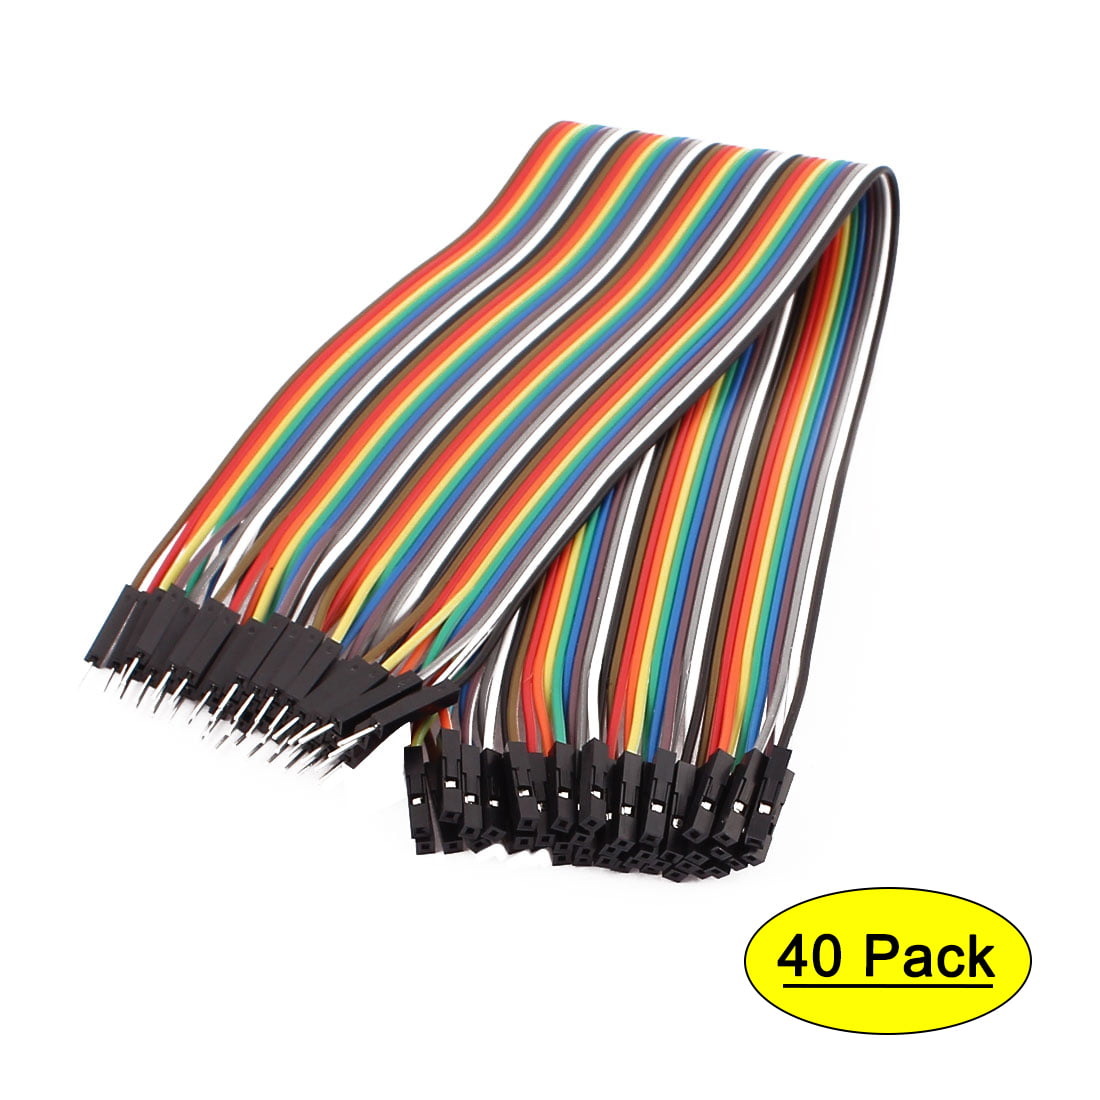 20cm 2.54mm Female to Female Wire Jumper Cable 1P-1P BSG